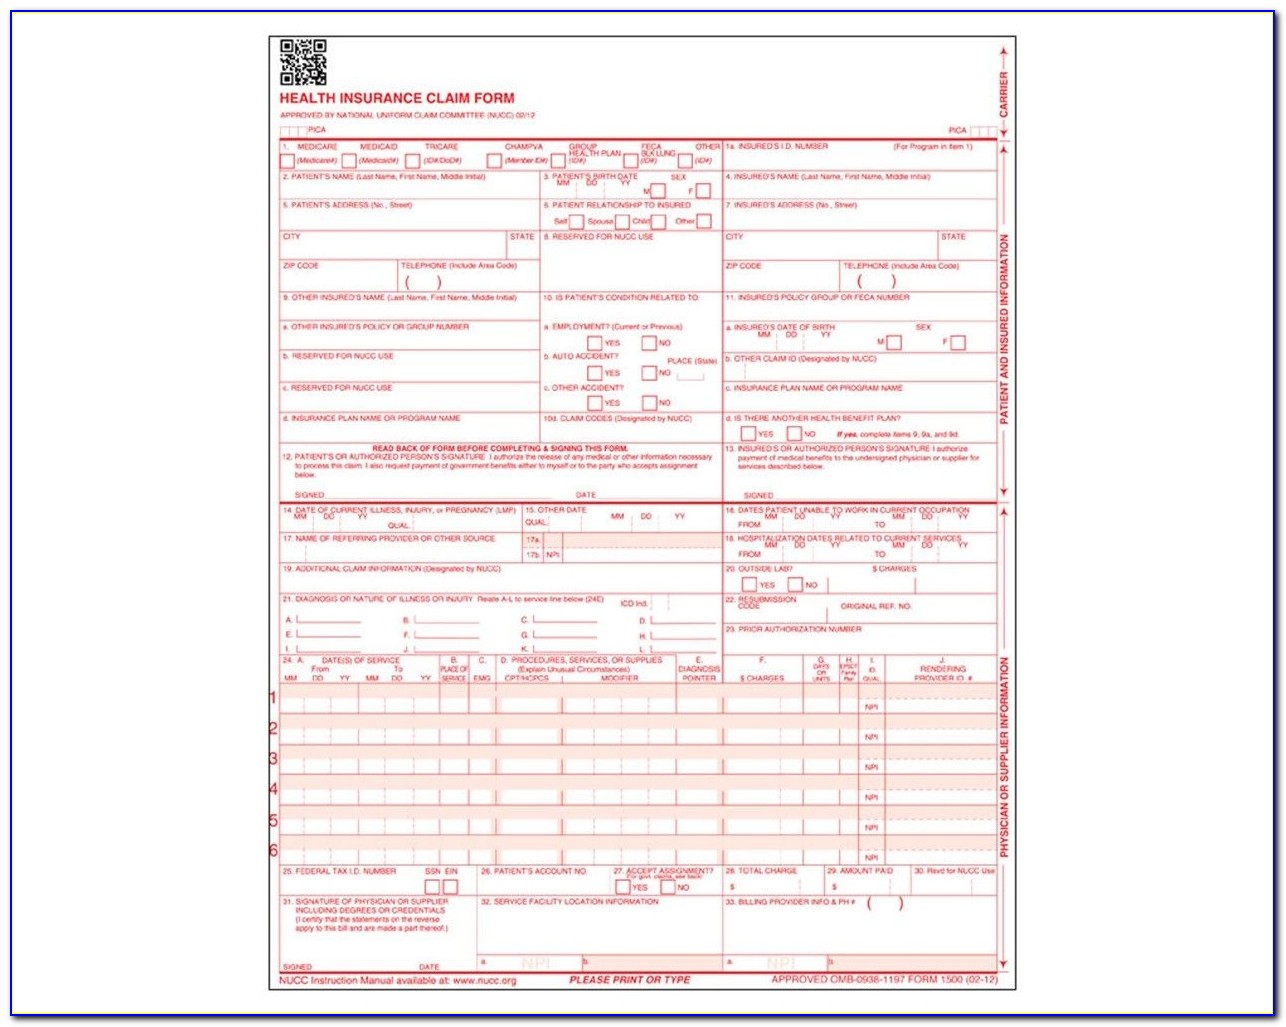 9352 14 Cms 1500 Claim Forms, Hcfa (version 02/12), 1 Part Throughout Cms 1500 Form Printable